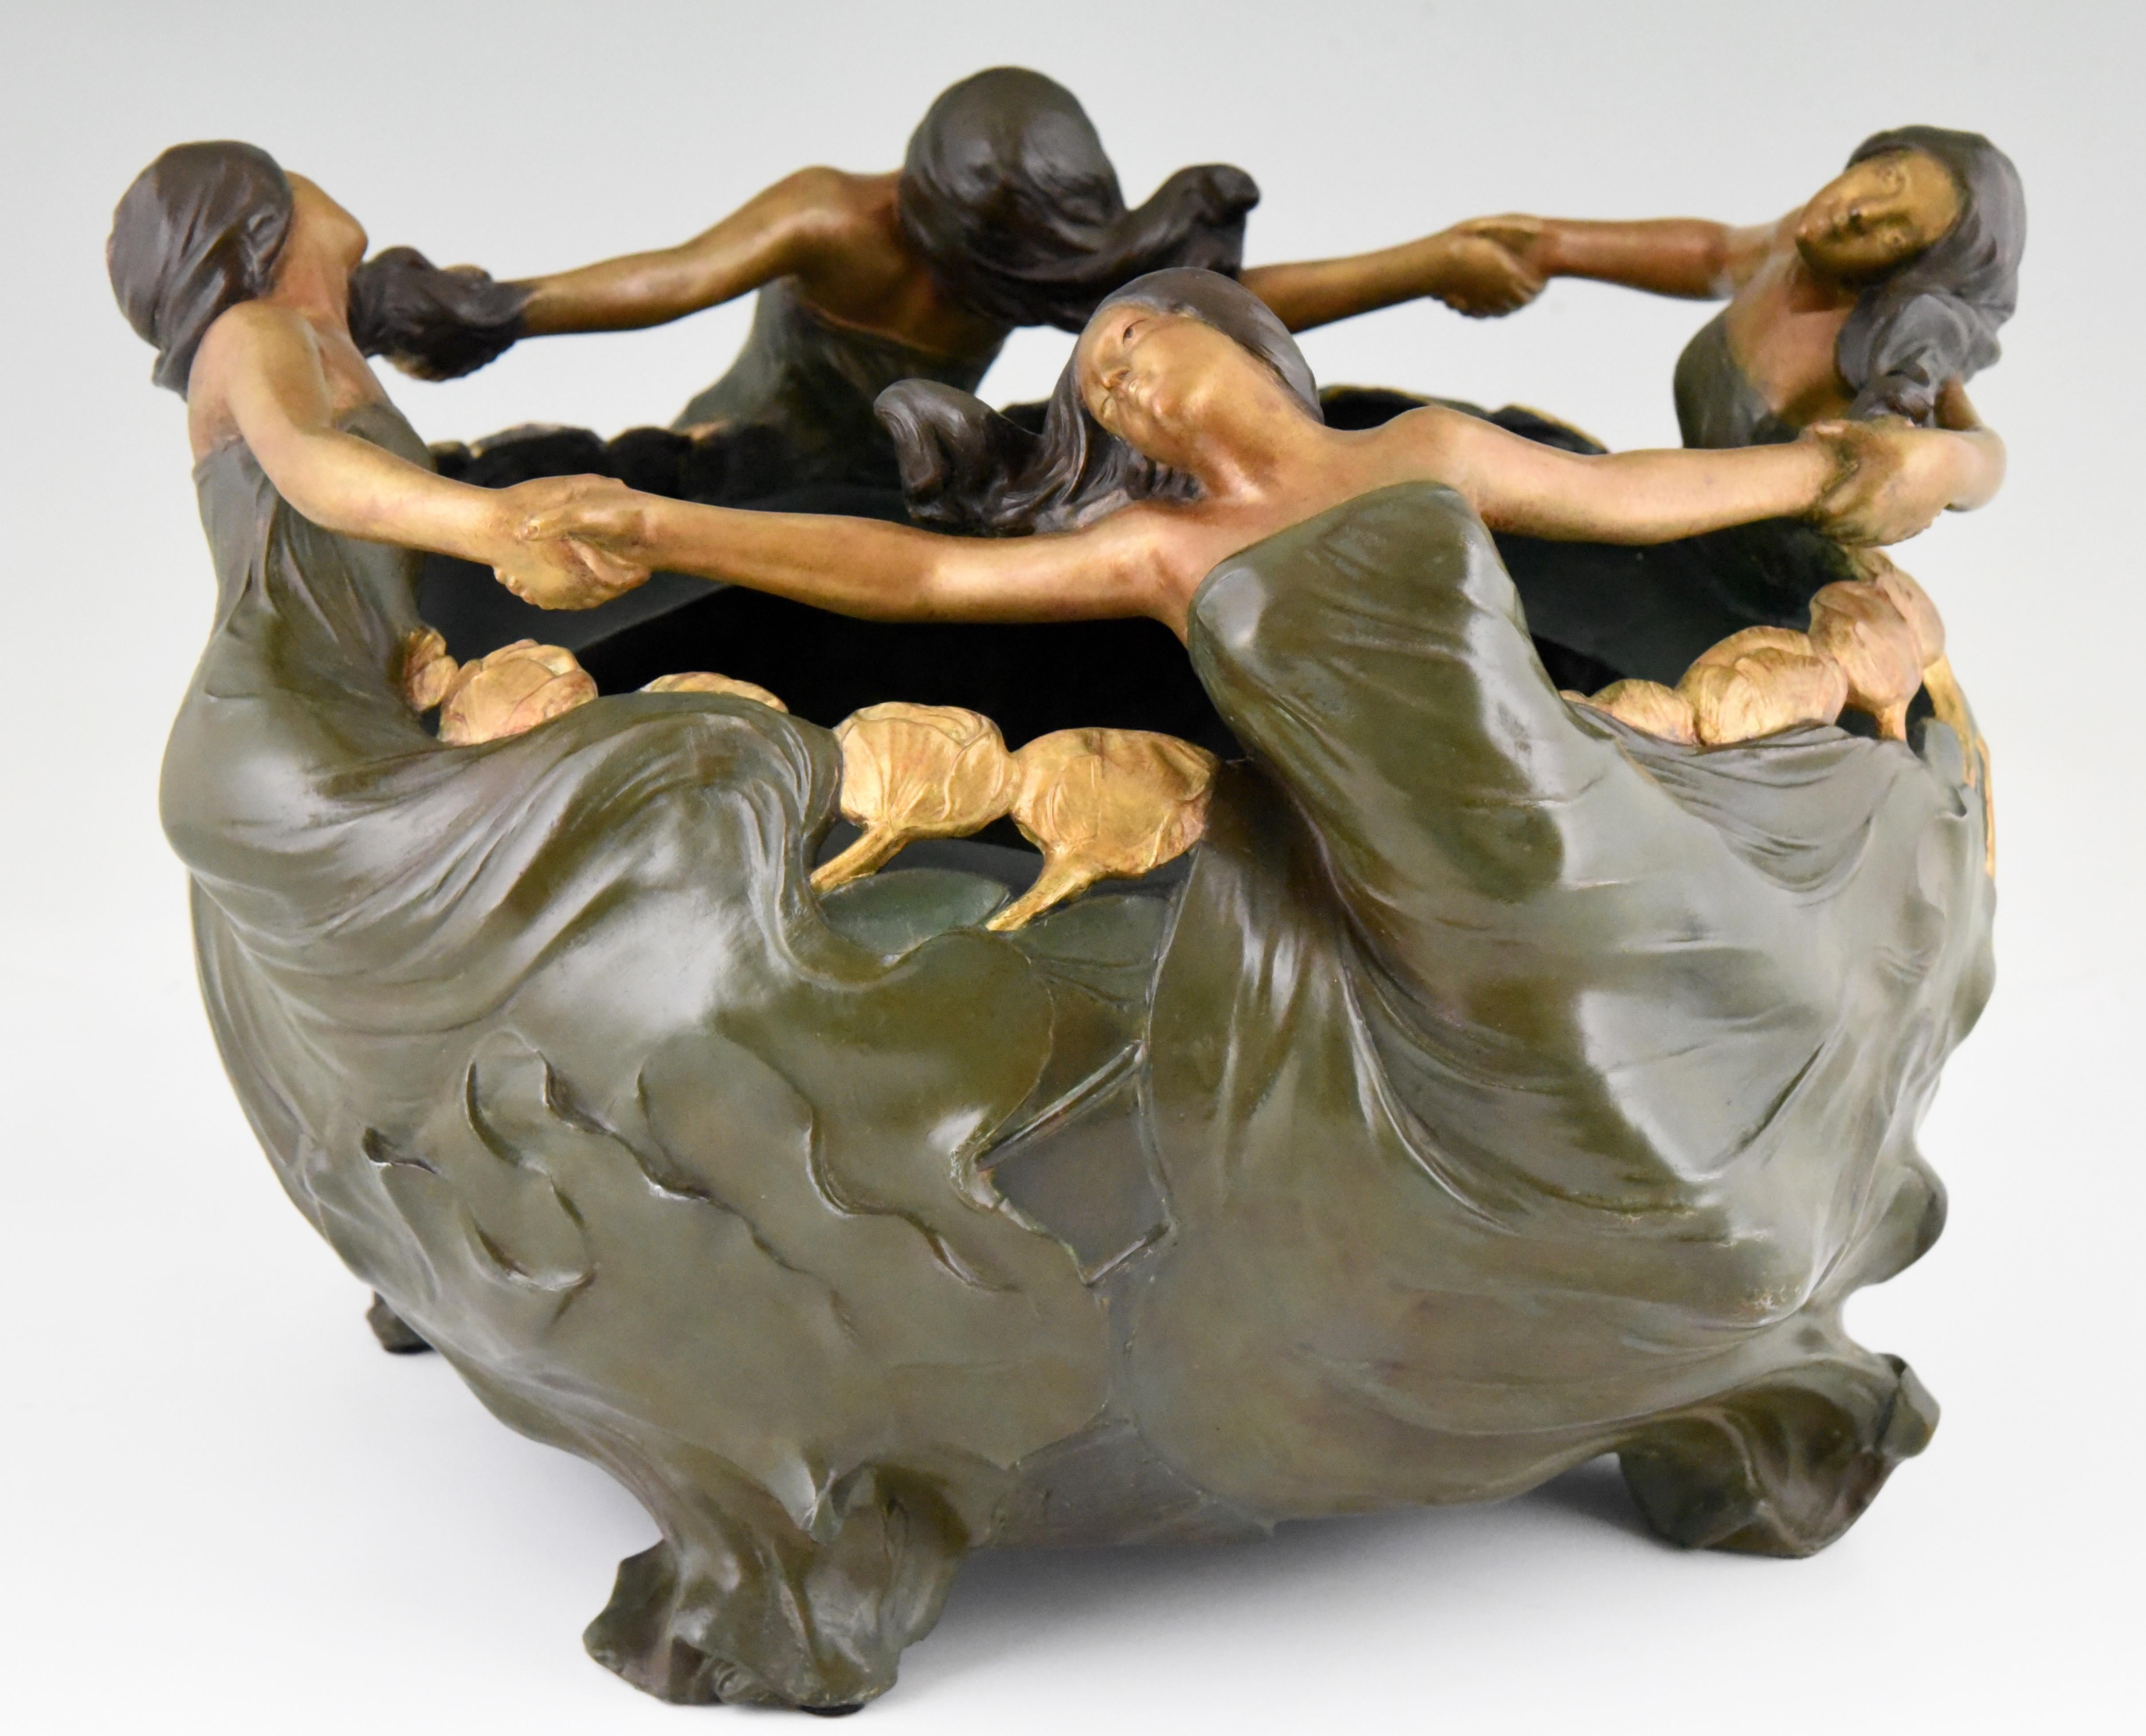 La Ronde, Art Nouveau cachepot, jardiniere or planter with dancing women in long dresses. The surface is decorated with flowers.
Signed by Louis Eugene Maurel, born in Paris in 1880. 
The pewter flower dish has a beautiful multi color patina.